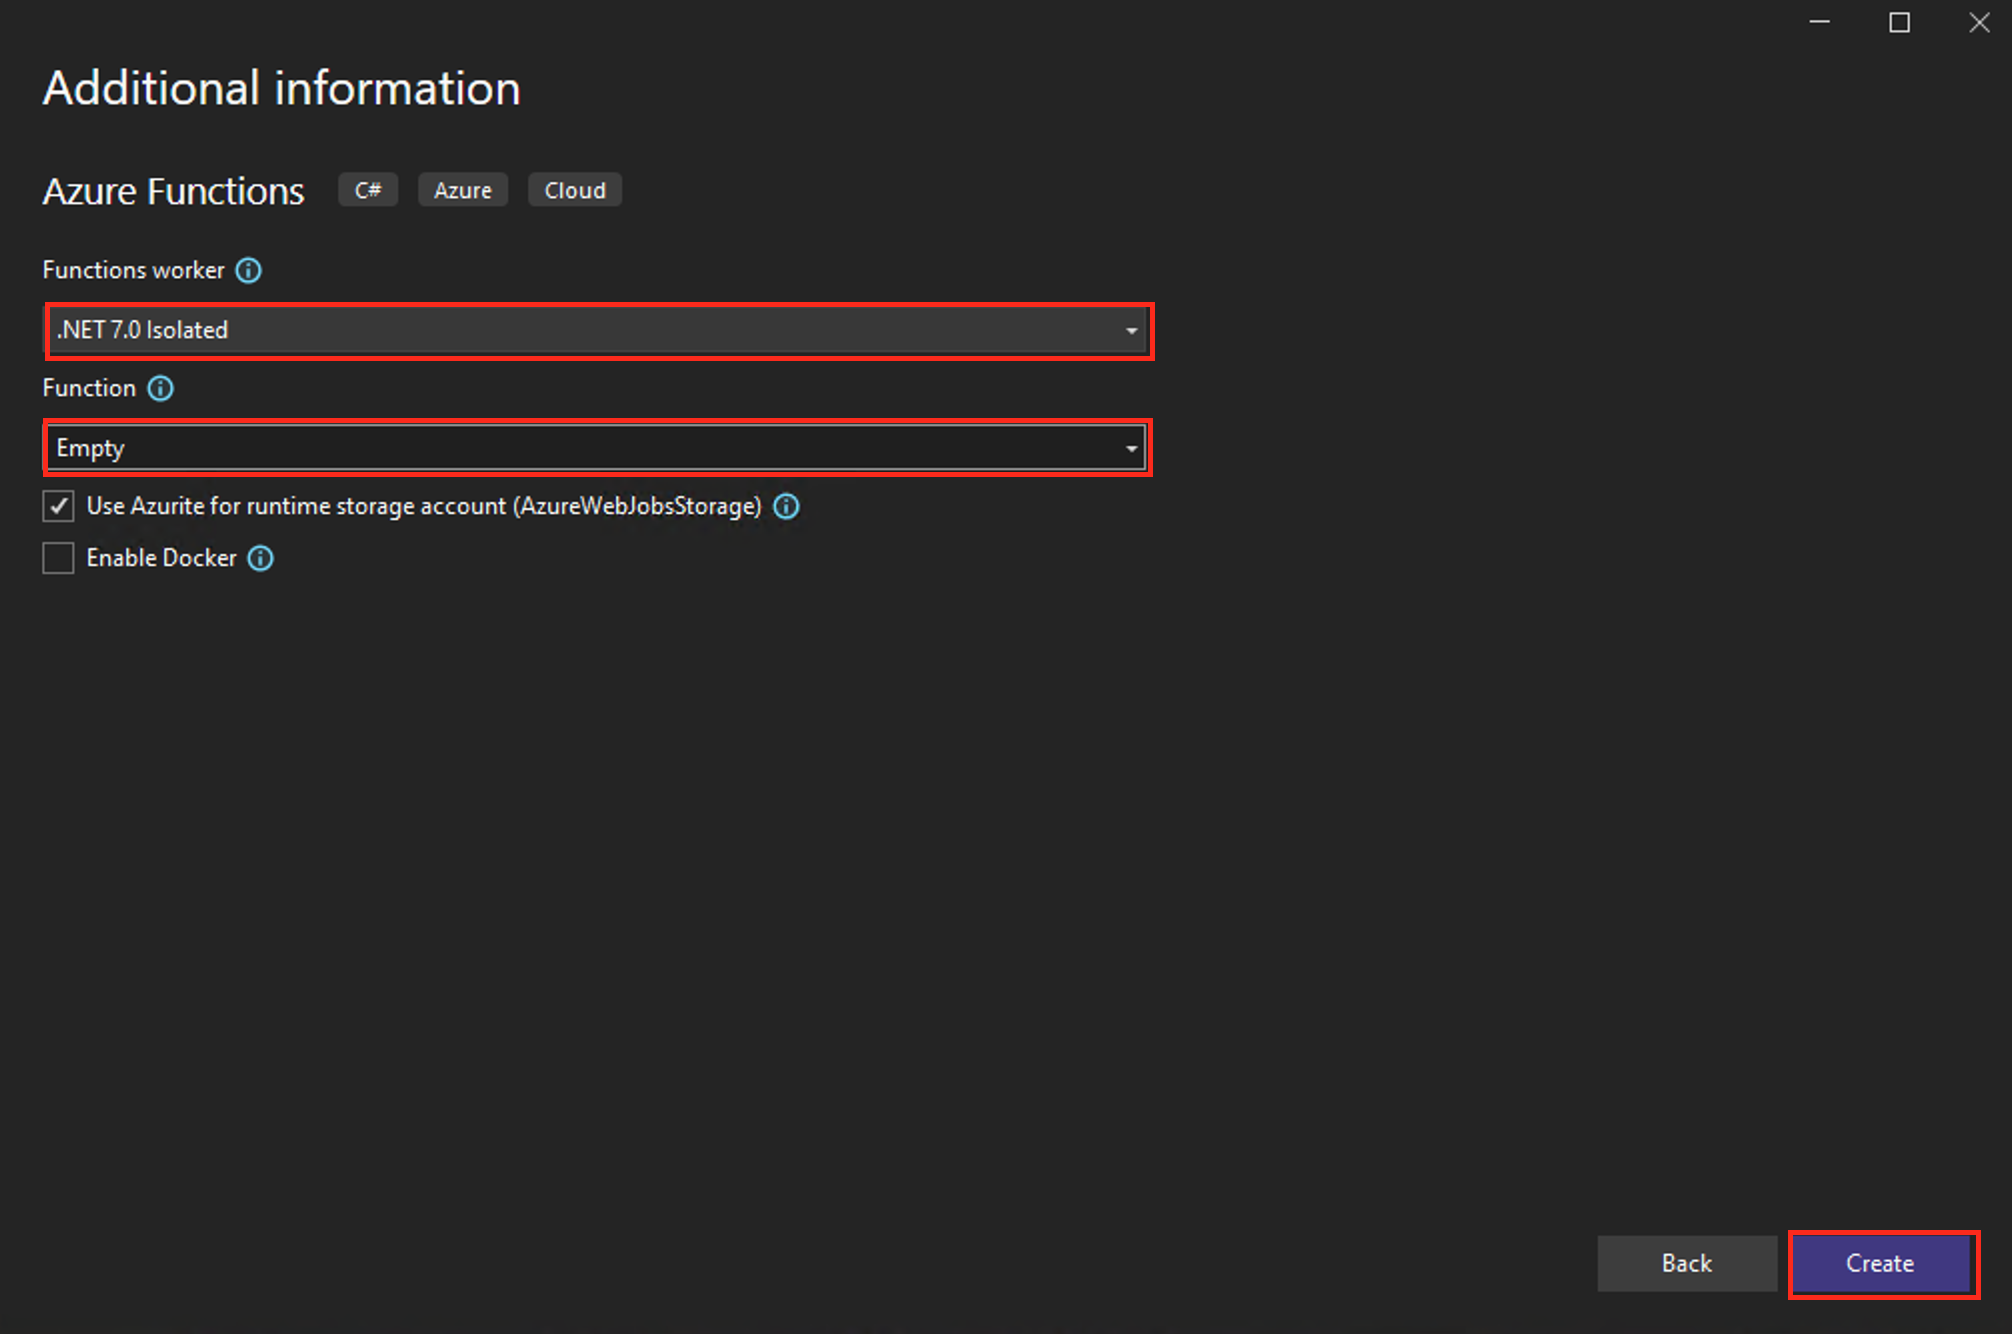 Screenshot of create a new Azure Functions Application dialog in Visual Studio.